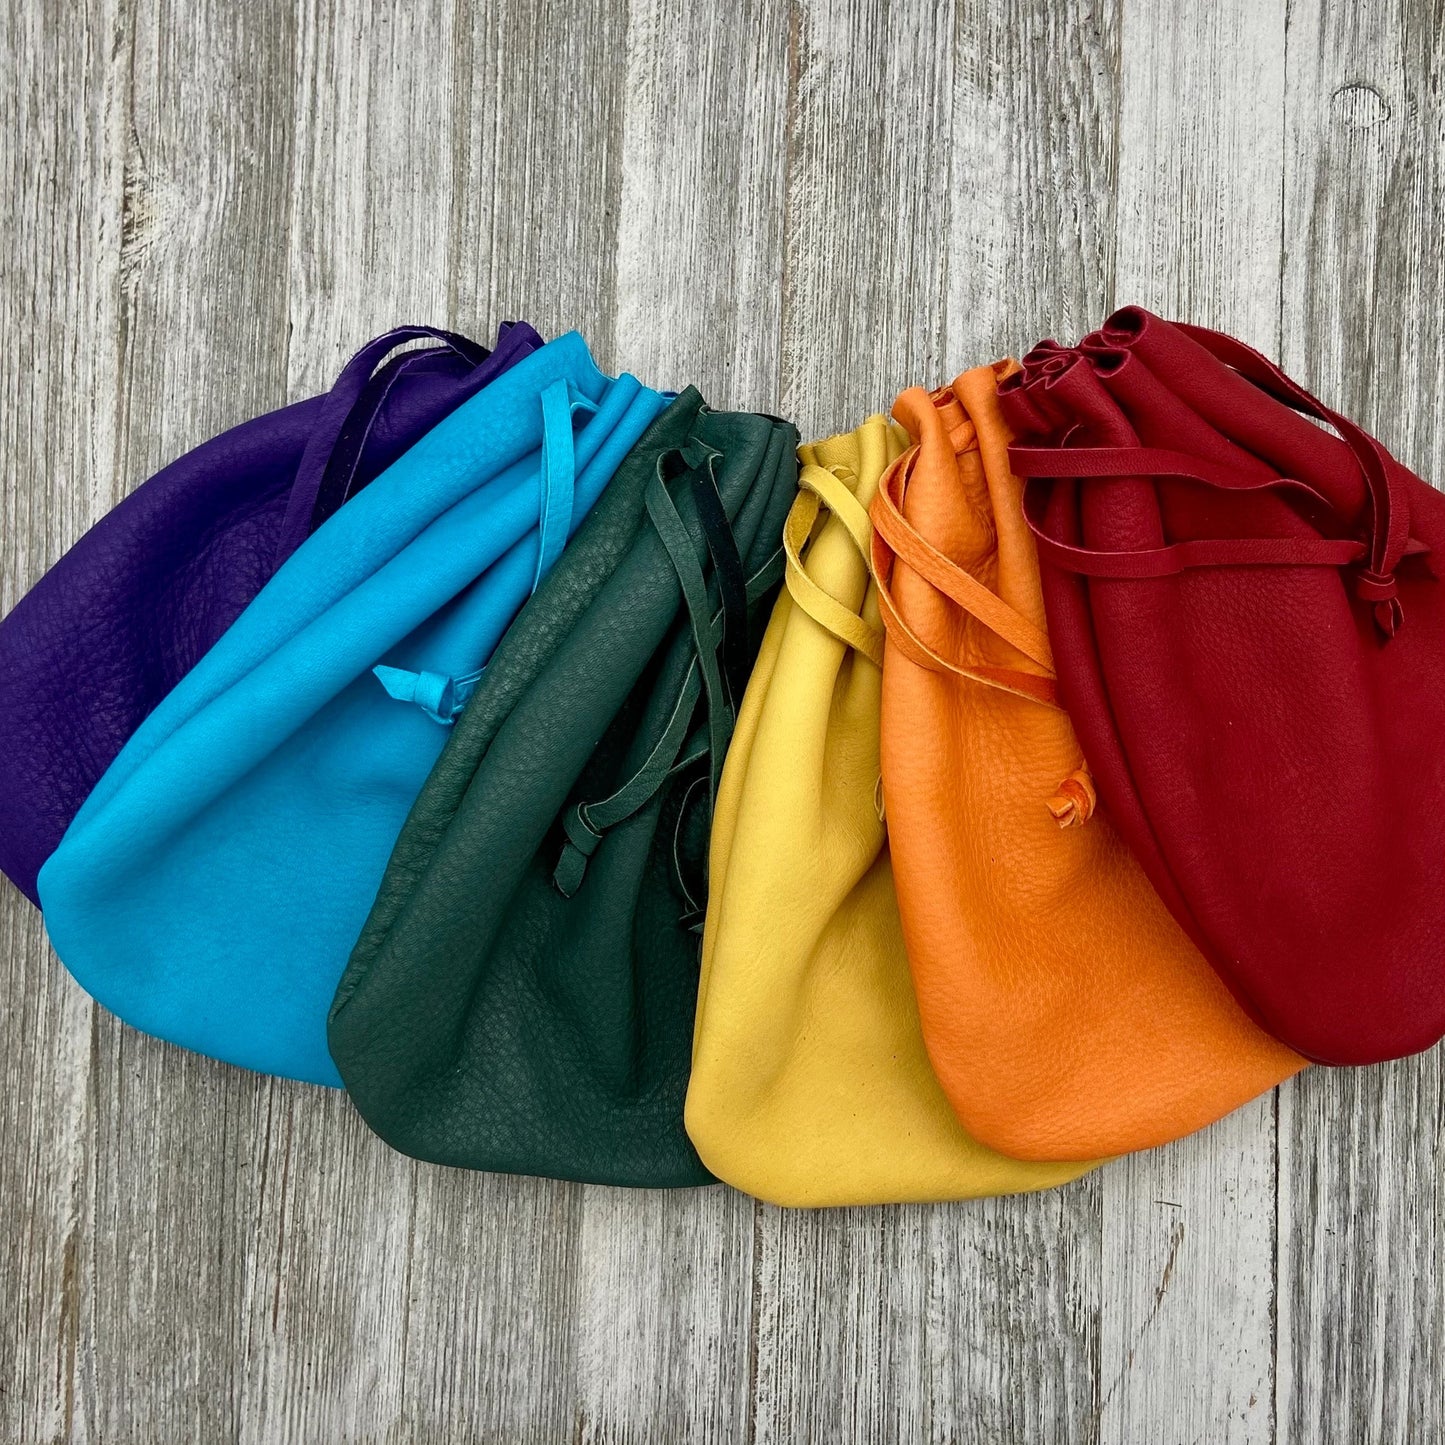 Large Colorful Deer Skin Drawstring Pouch (9" x 7.25")